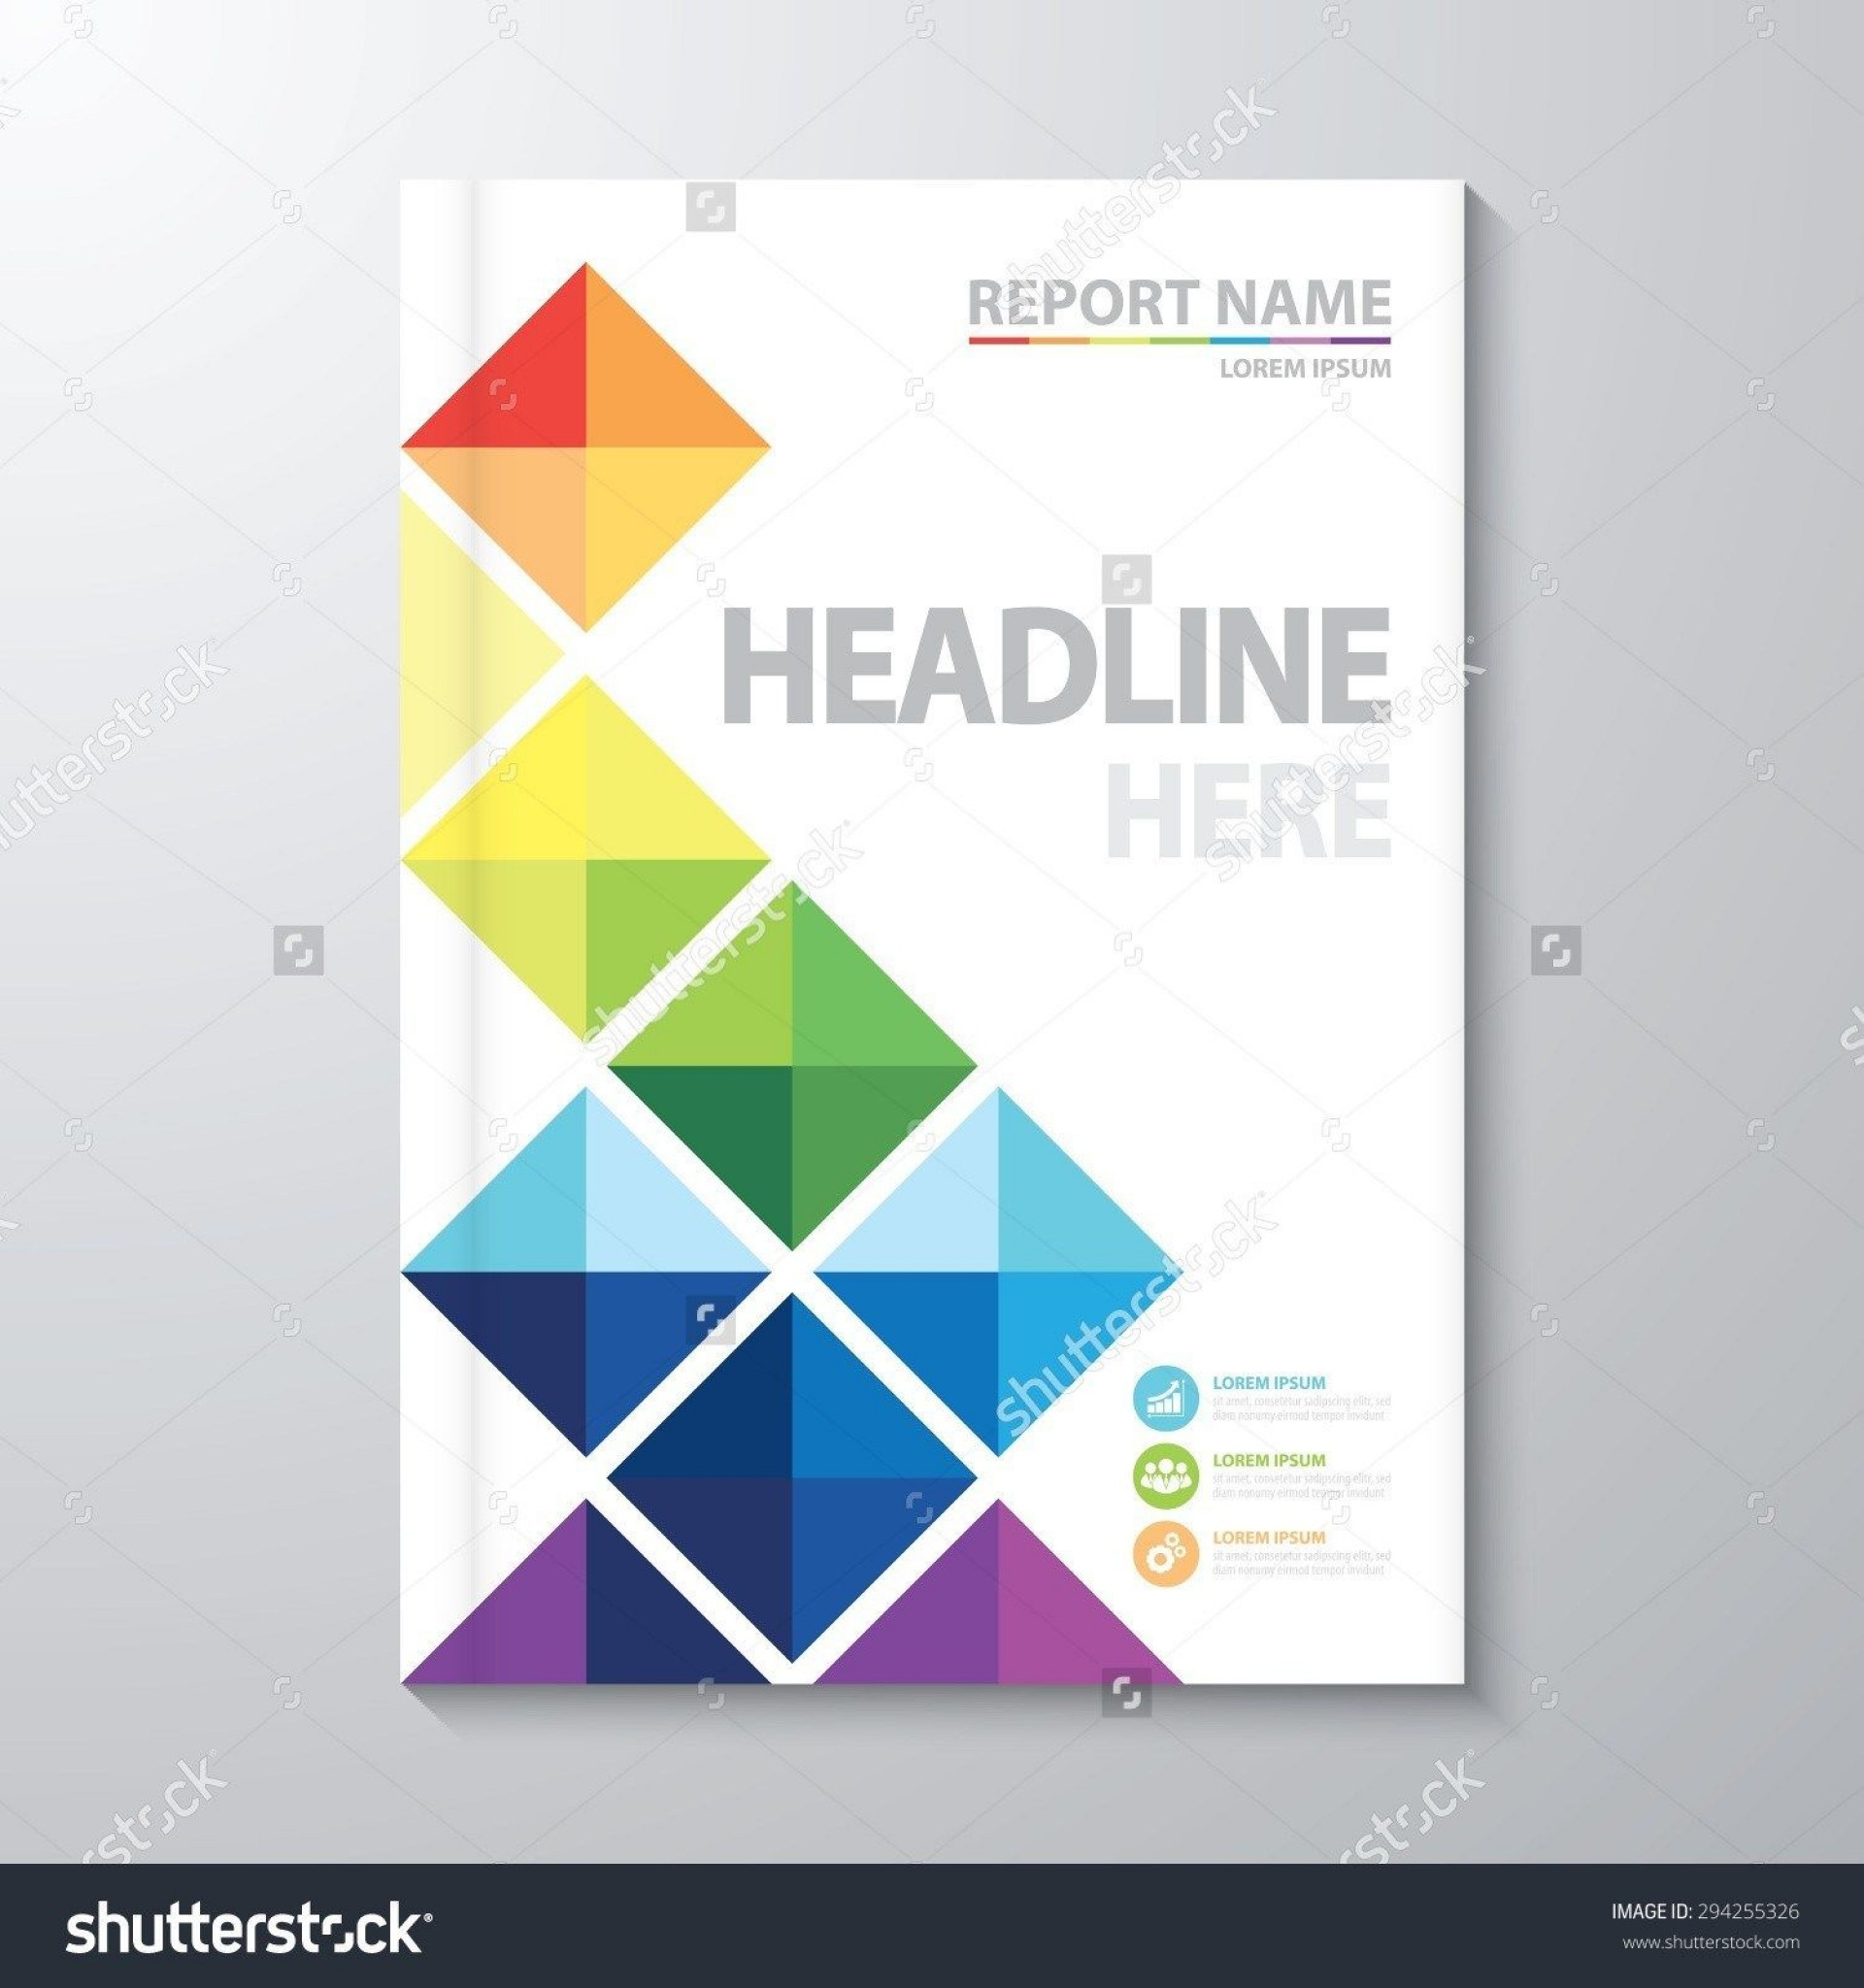 005 Report Cover Page Templatelab Template Ideas Word Pages With Regard To Word Report Cover Page Template